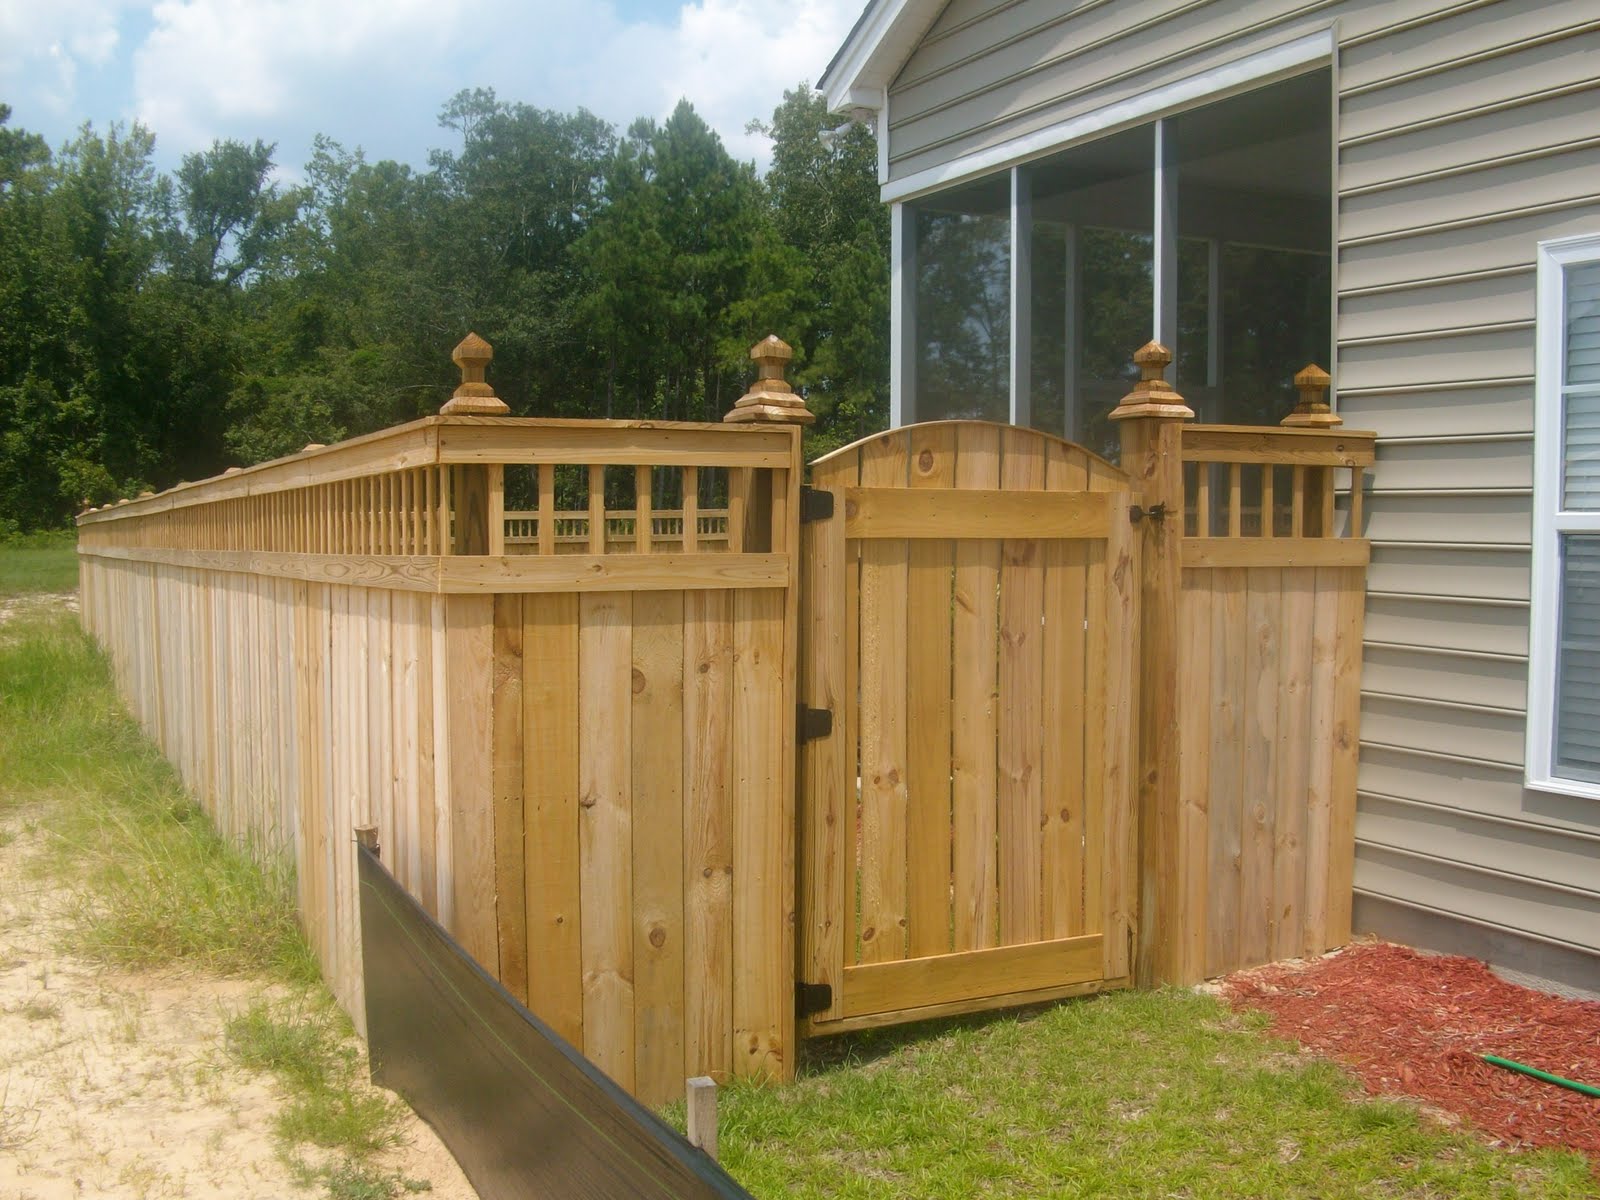 Wooden Fence And Gate Designs : Utrails Home Design - Wooden Gate ...